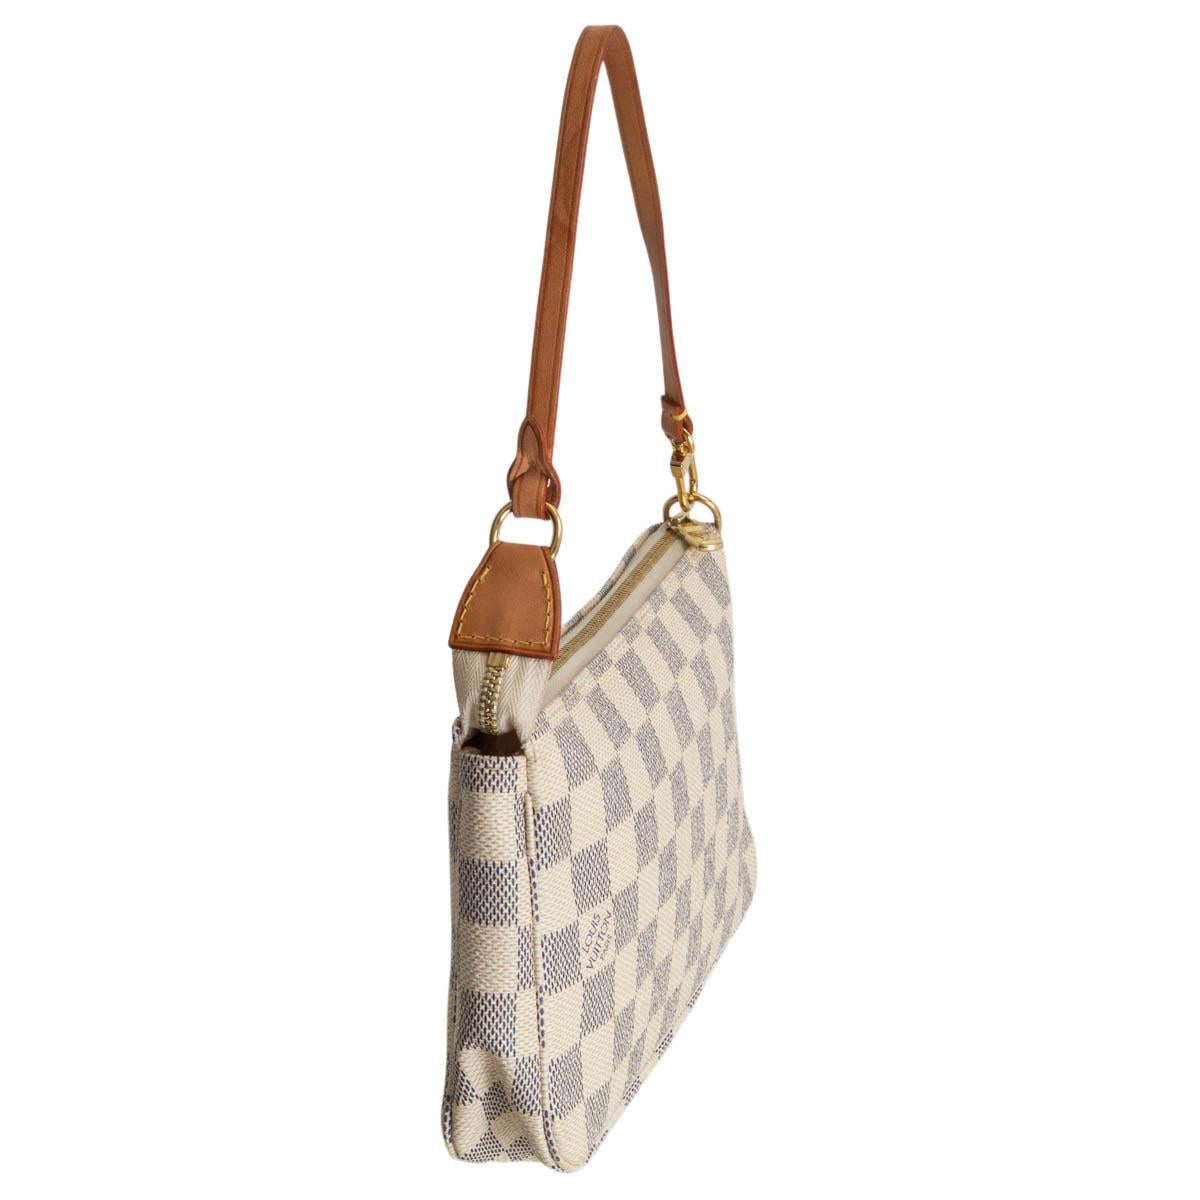 100% authentic Louis Vuitton Pochette Accessoires shoulder bag in off-white and navy Damier Azur canvas featuring gold-tone hardware. Opens with a zipper on top and has a removable Vachetta leather shoulder strap. Has been carried and is in